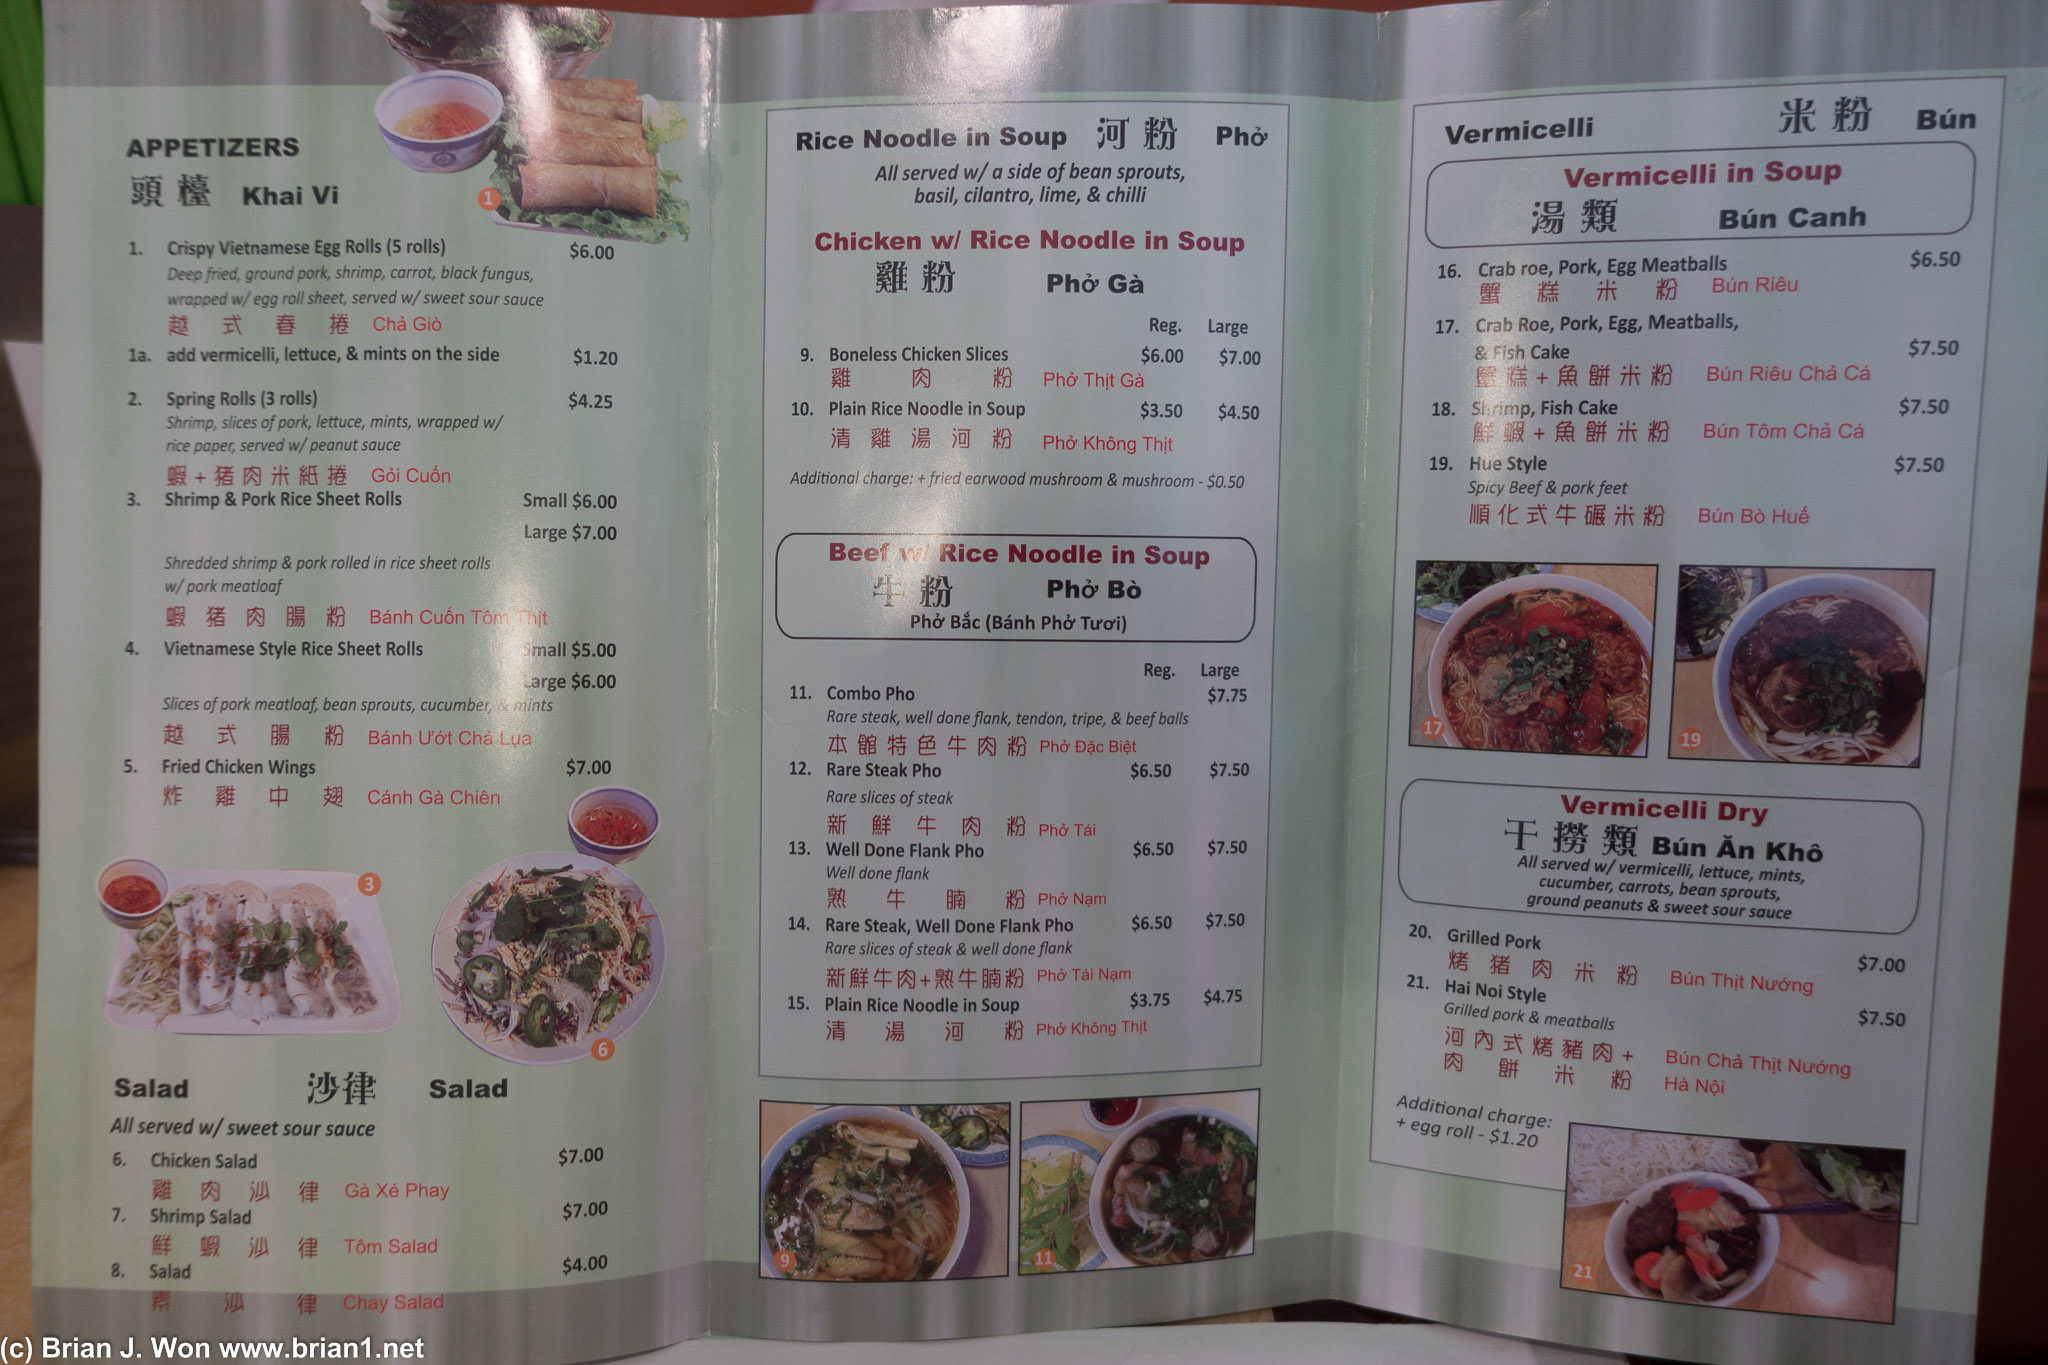 Next time I'll get my usual pho dac biet or pho tai.